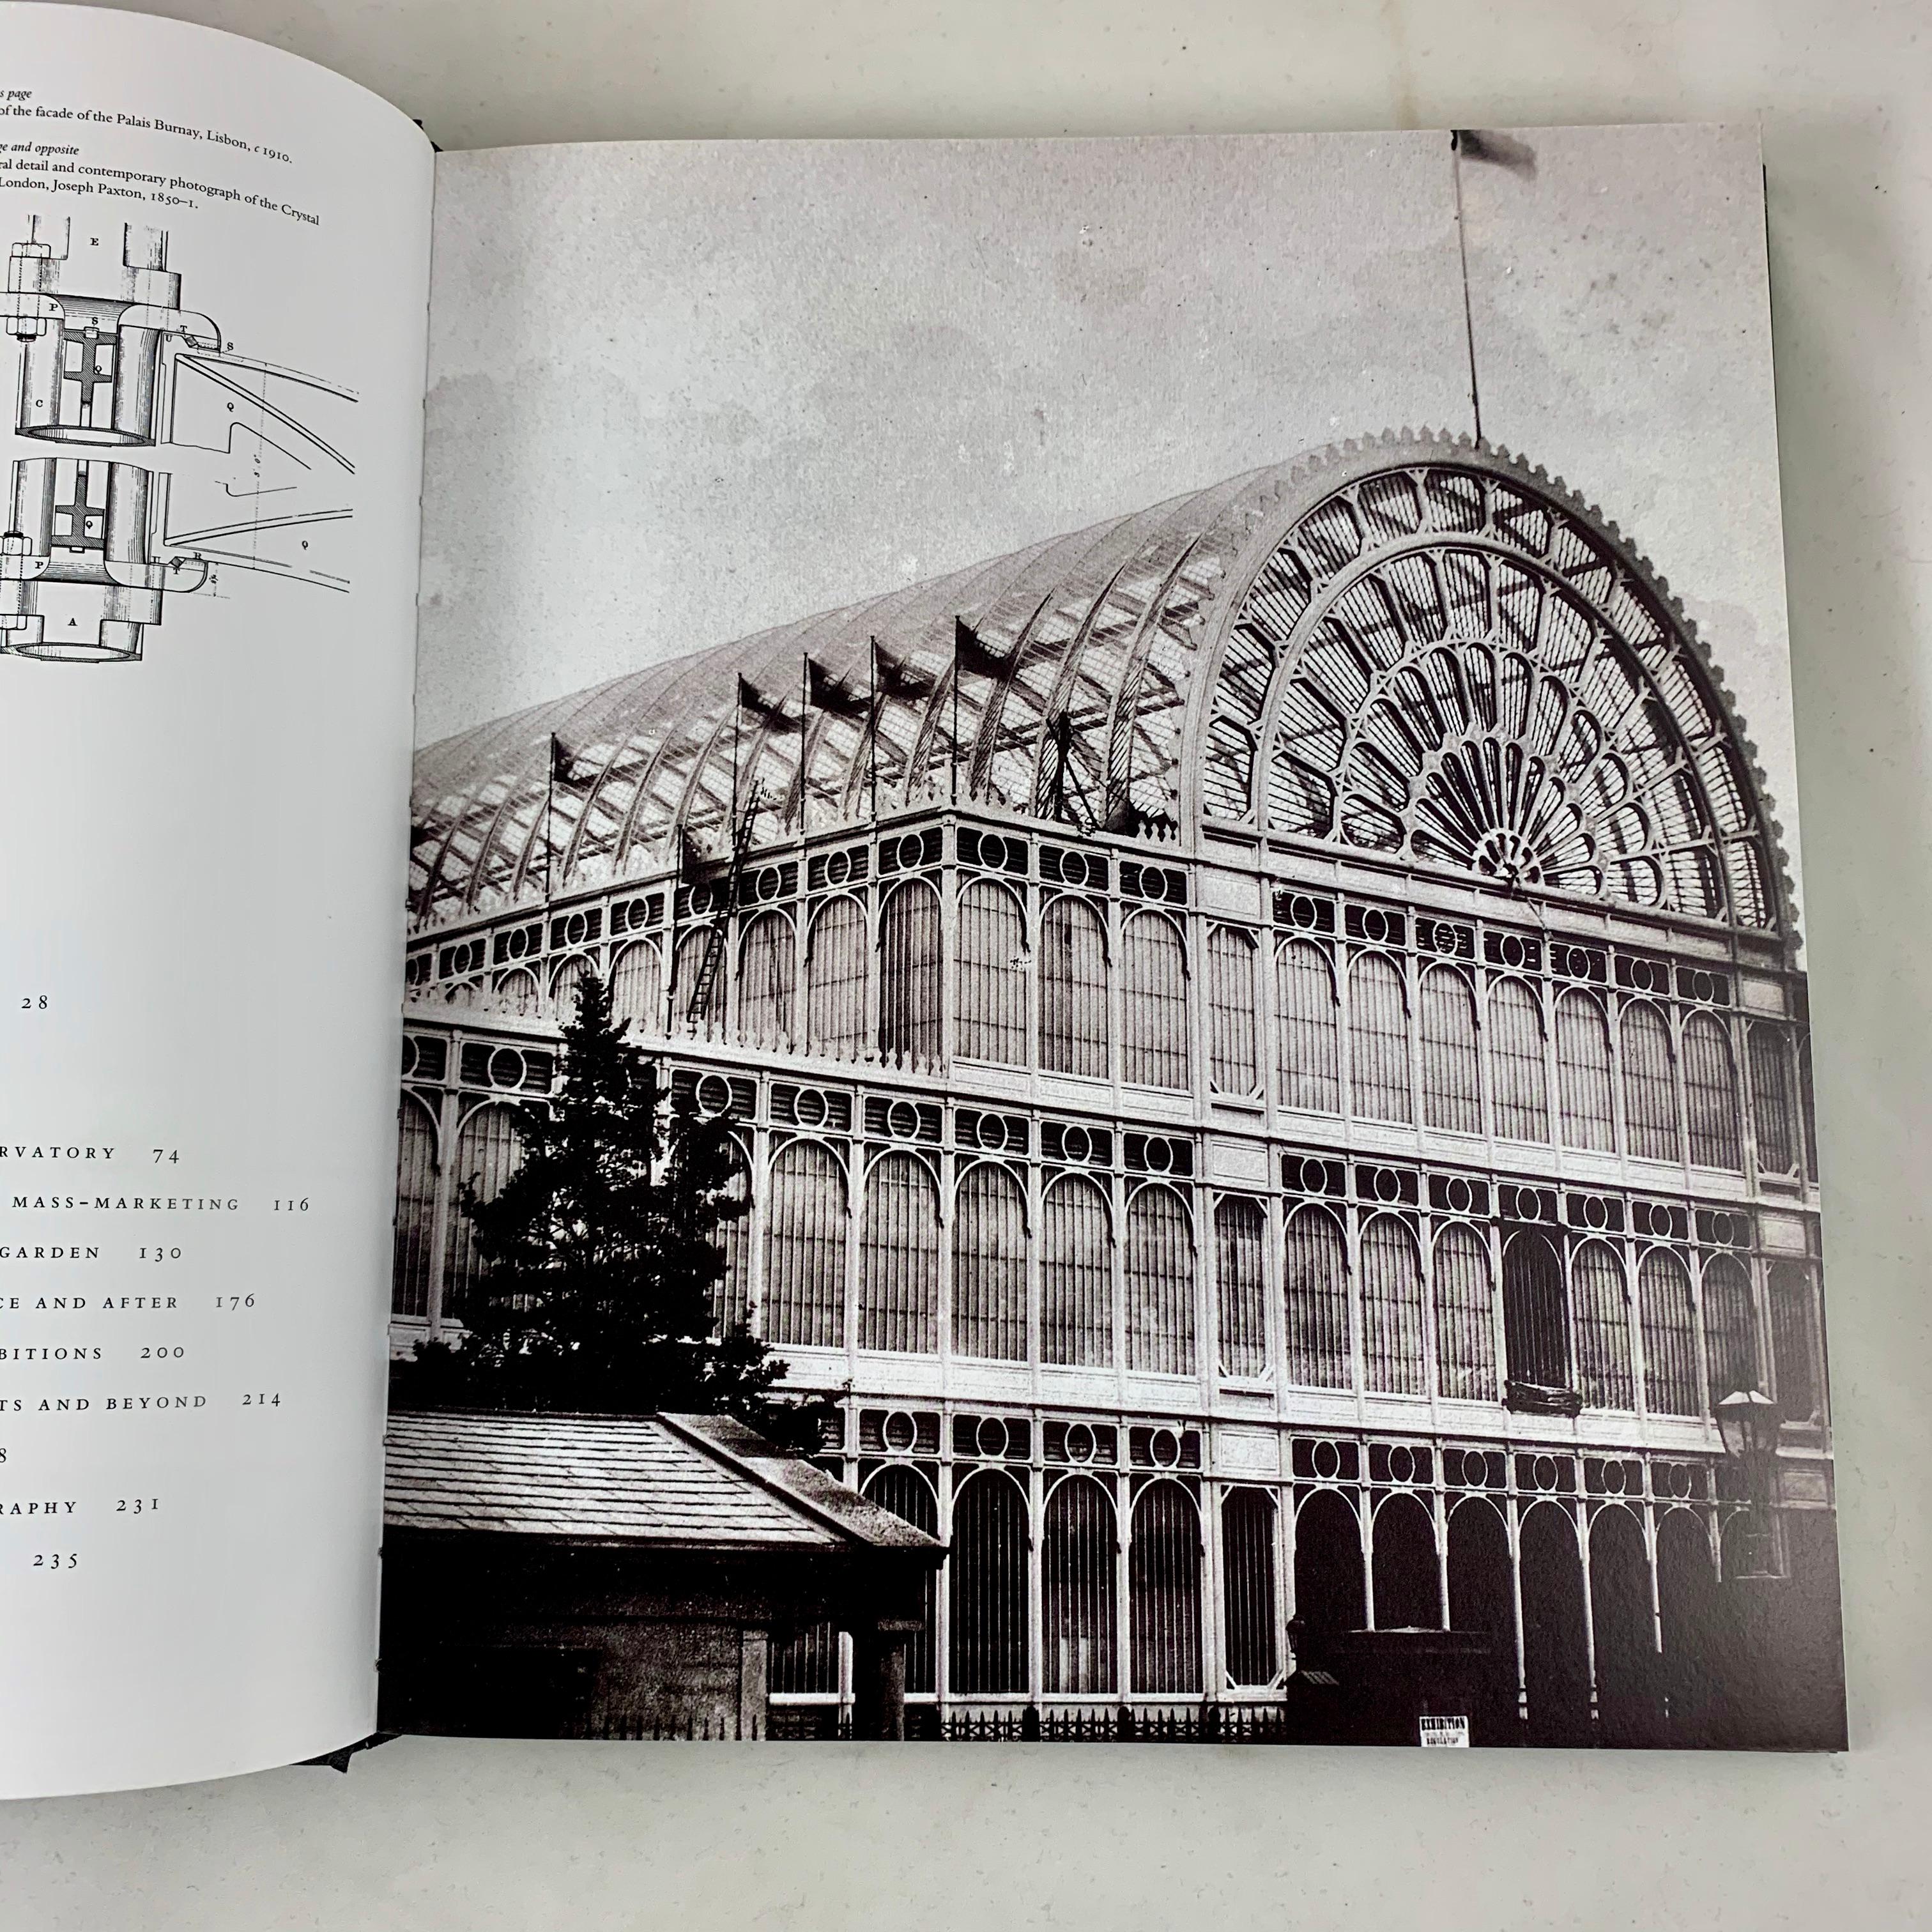 English The Glasshouse by John Hix – Phaidon Architecture History and Garden Photo Book For Sale